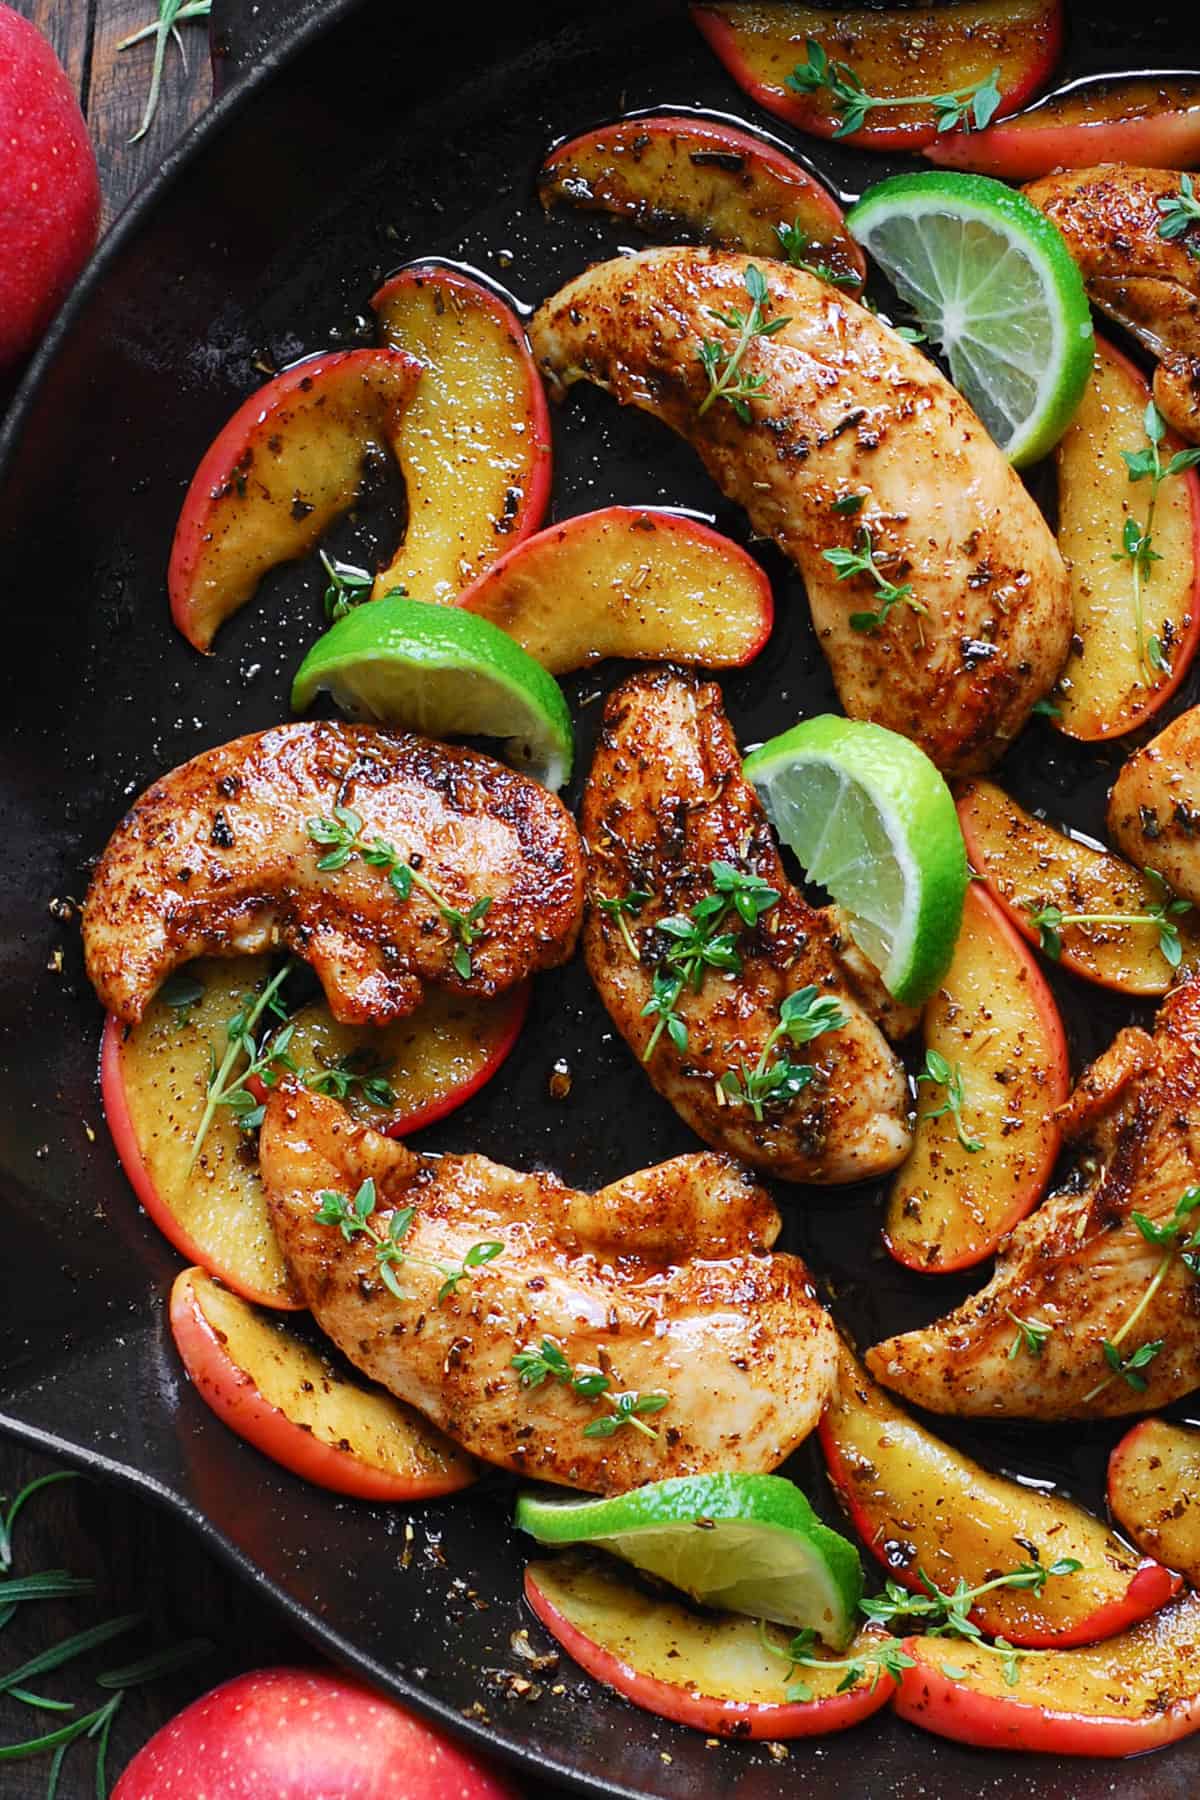 Chicken with Apples, Maple-Lime Sauce, and lime slices - in a cast iron skillet.